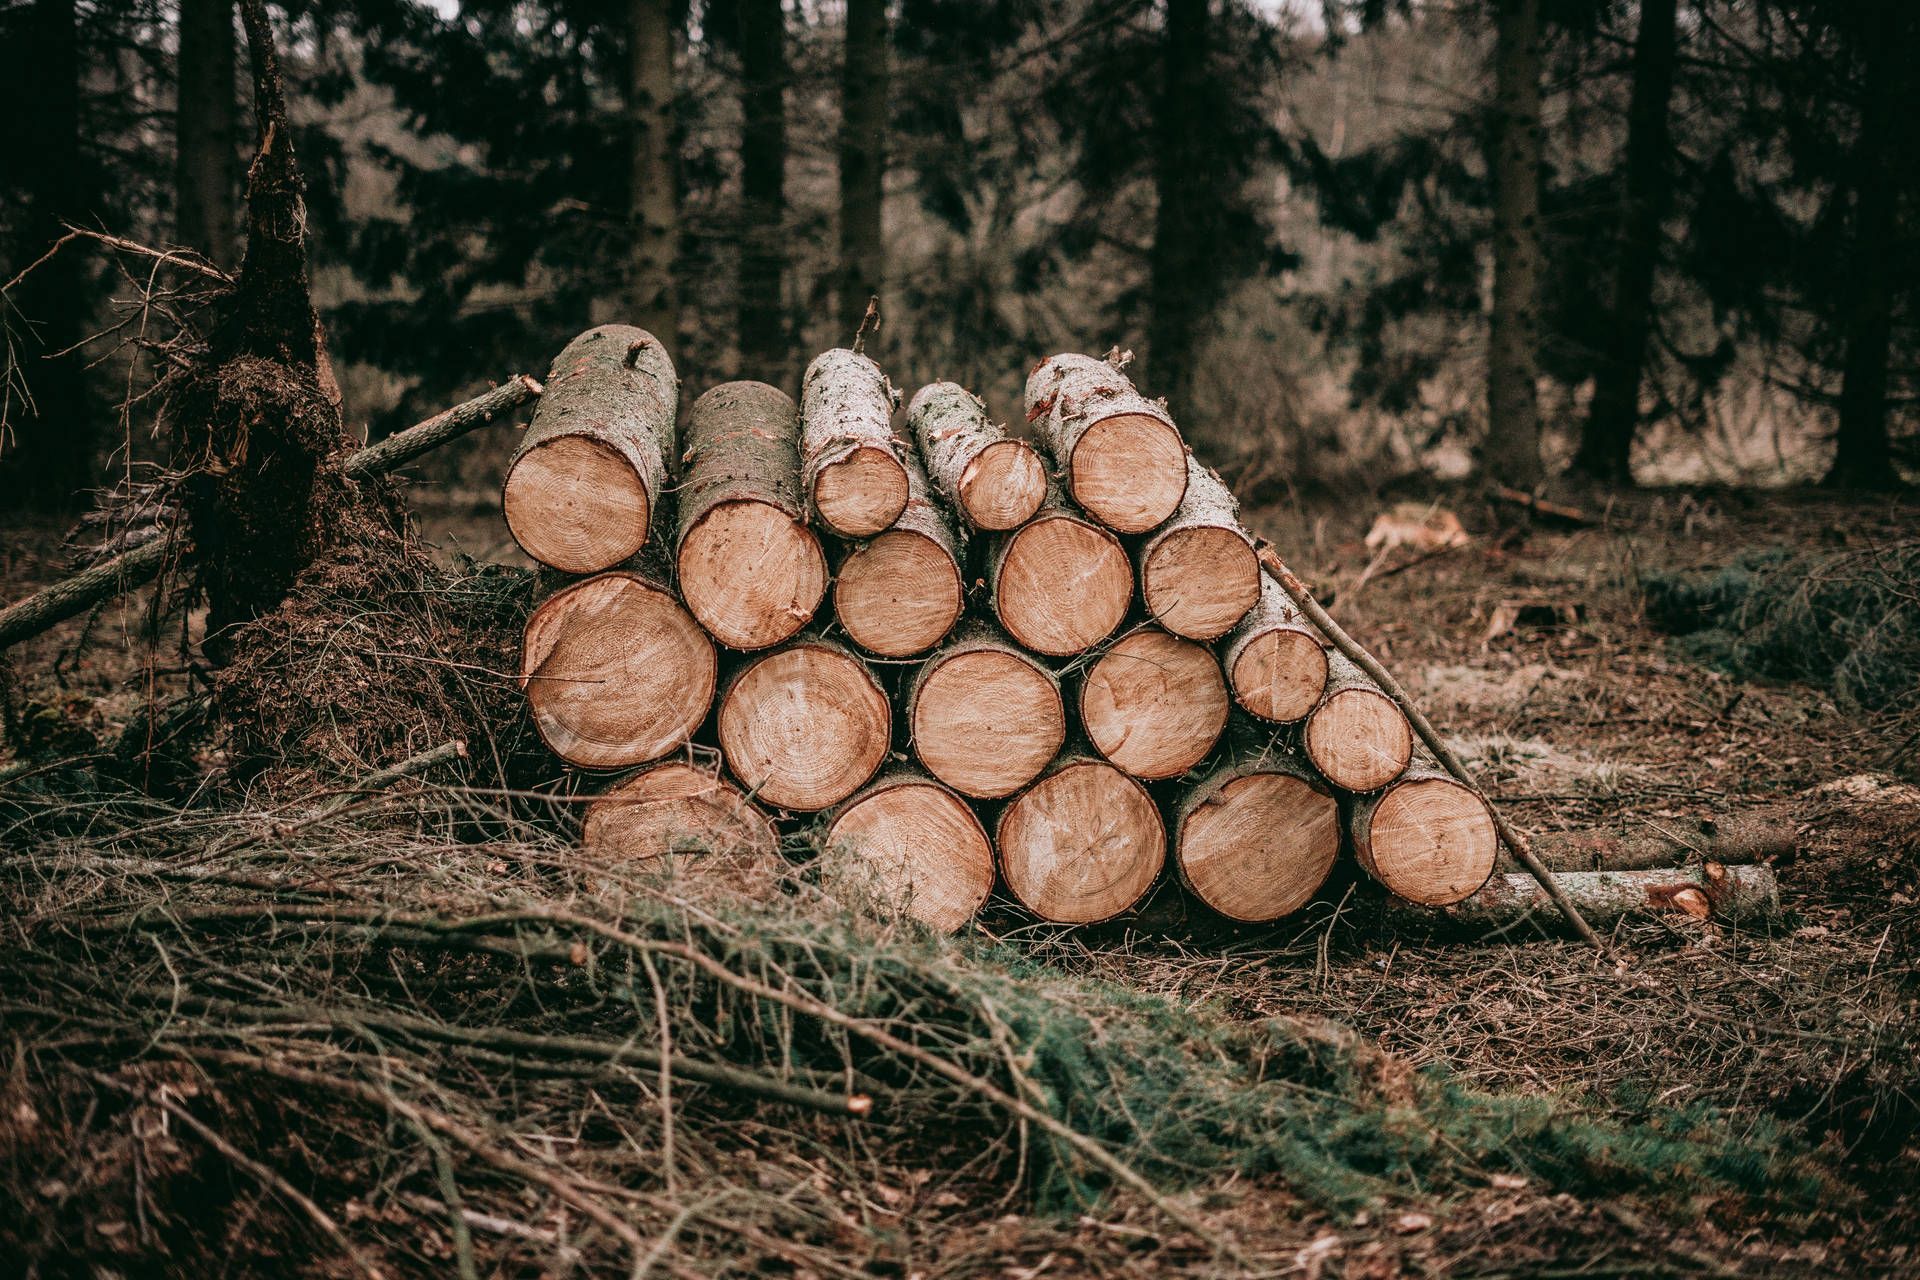 A pile of cut logs in the forest. - Woods